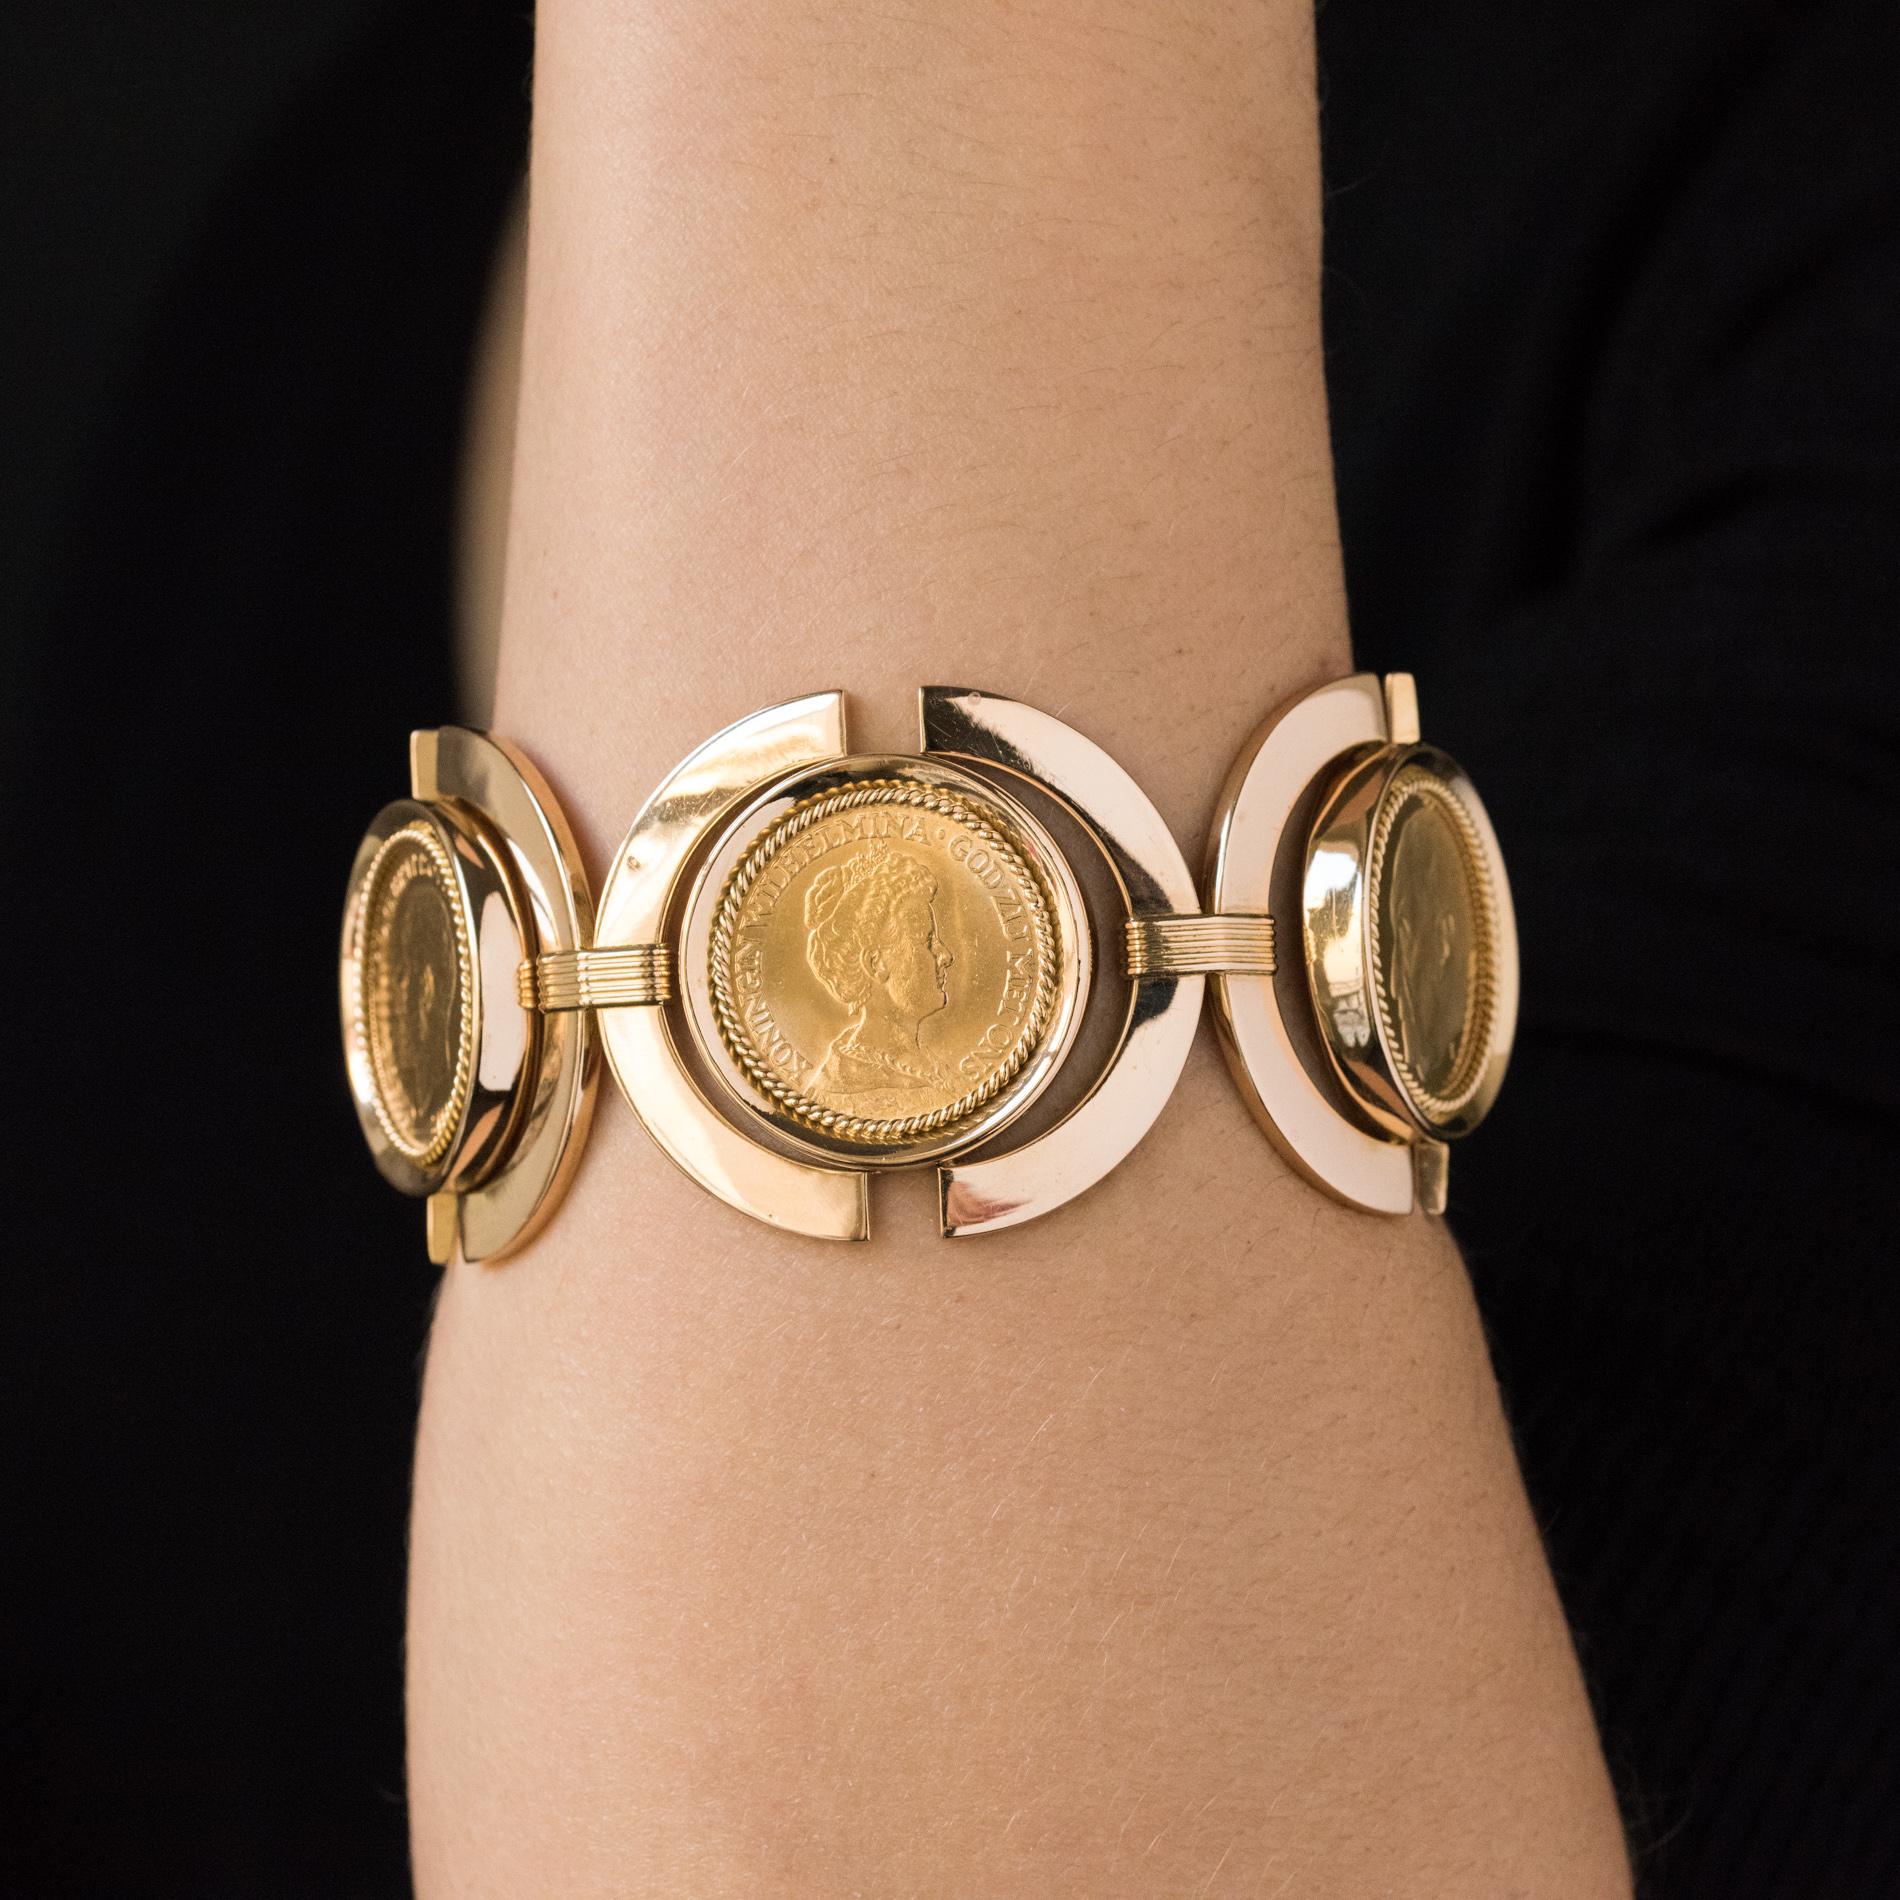 Bracelet in 18 karats yellow gold.
Bulky vintage bracelet, it is composed of 5 round-shaped motifs linked together by gold staples. At the center of each motif, is set on a mobile kitten, a gold coin lined with a gold cord. The coins are 1 of 20